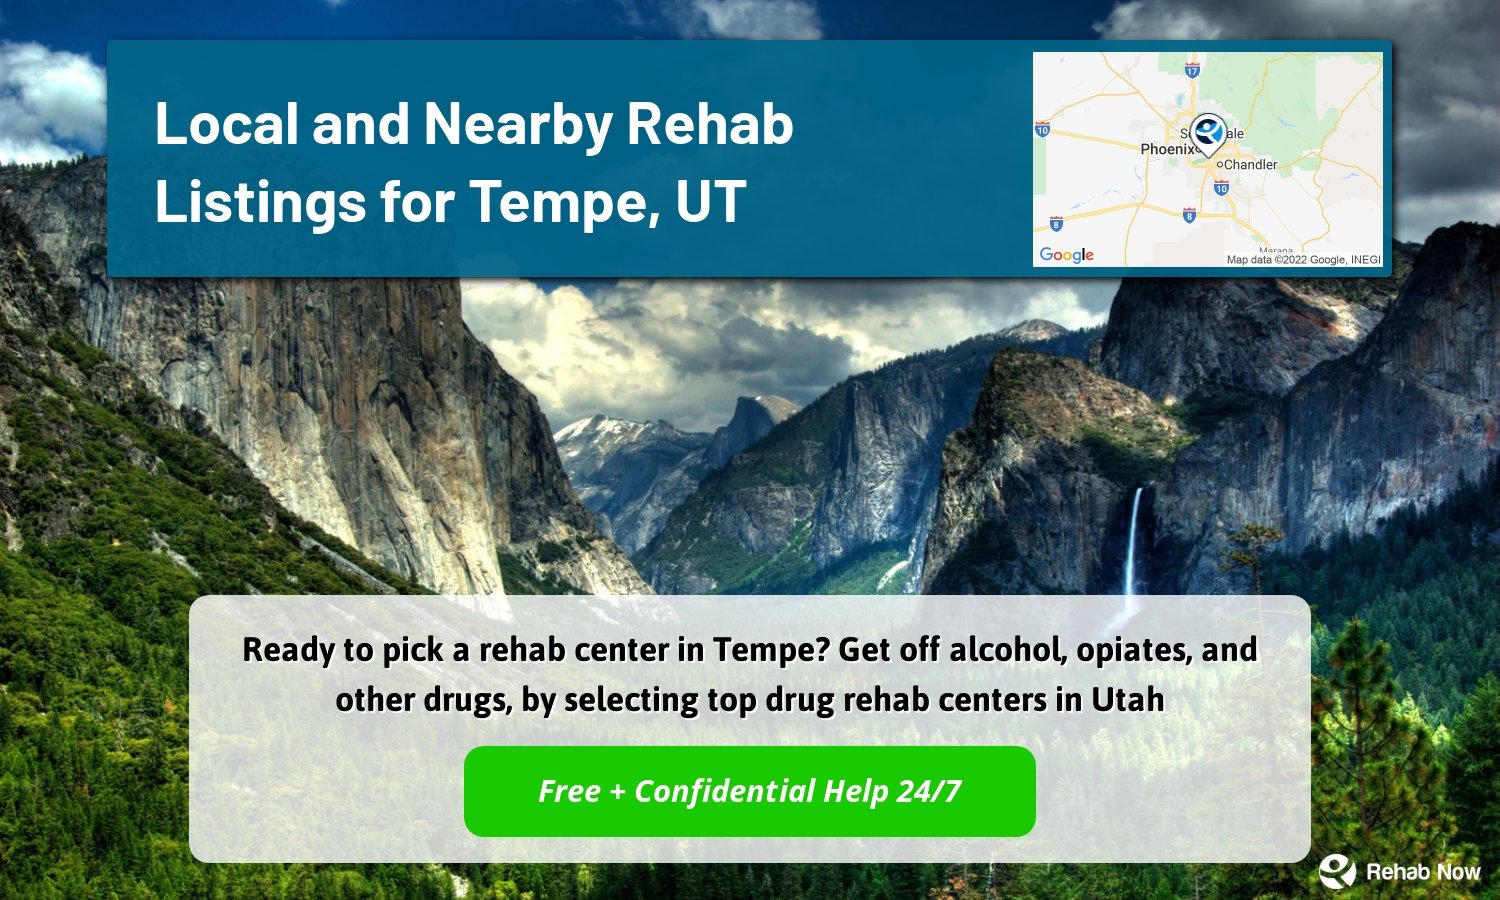 Ready to pick a rehab center in Tempe? Get off alcohol, opiates, and other drugs, by selecting top drug rehab centers in Utah